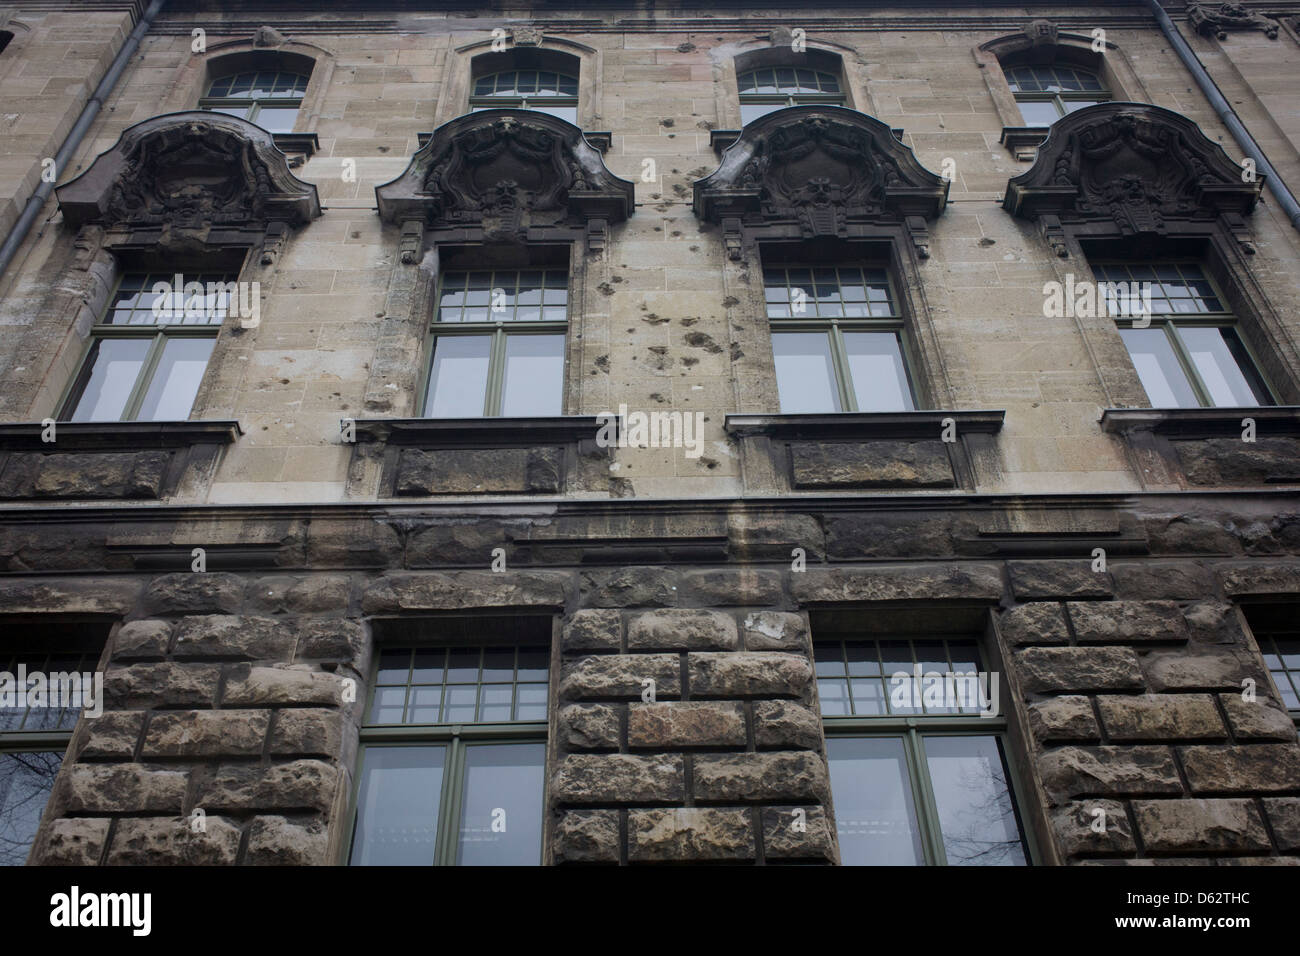 The blackened and ricochet-scarred stonework of an old building dating from before the second world war, marked during the battle for the city during the fall of the Third Reich, the end of Nazi fascism in the spring of 1945. Stock Photo